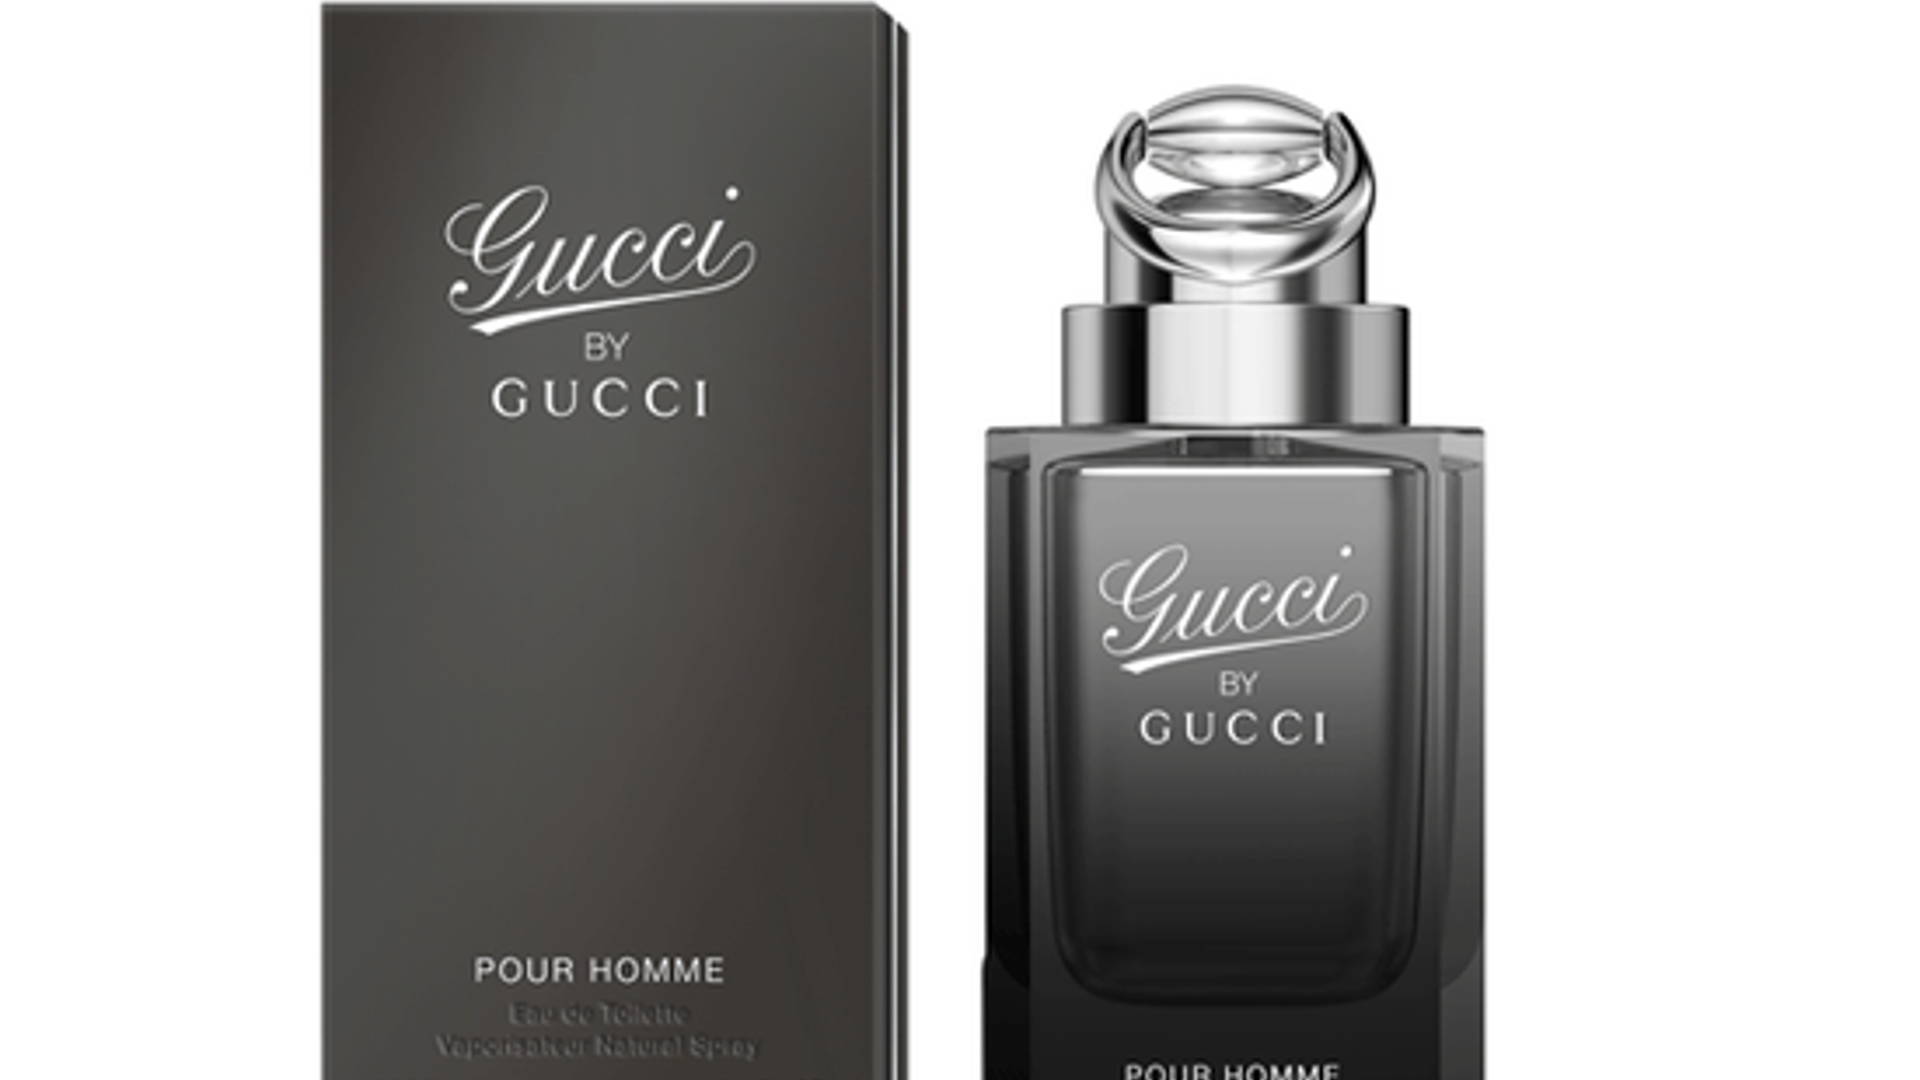 Pour homme для мужчин. Gucci by Gucci pour homme EDT, 90 ml. Gucci "Gucci pour homme" 100 ml. Gucci by Gucci pour homme. Туалетная вода мужская 90 мл Gucci by Gucci.